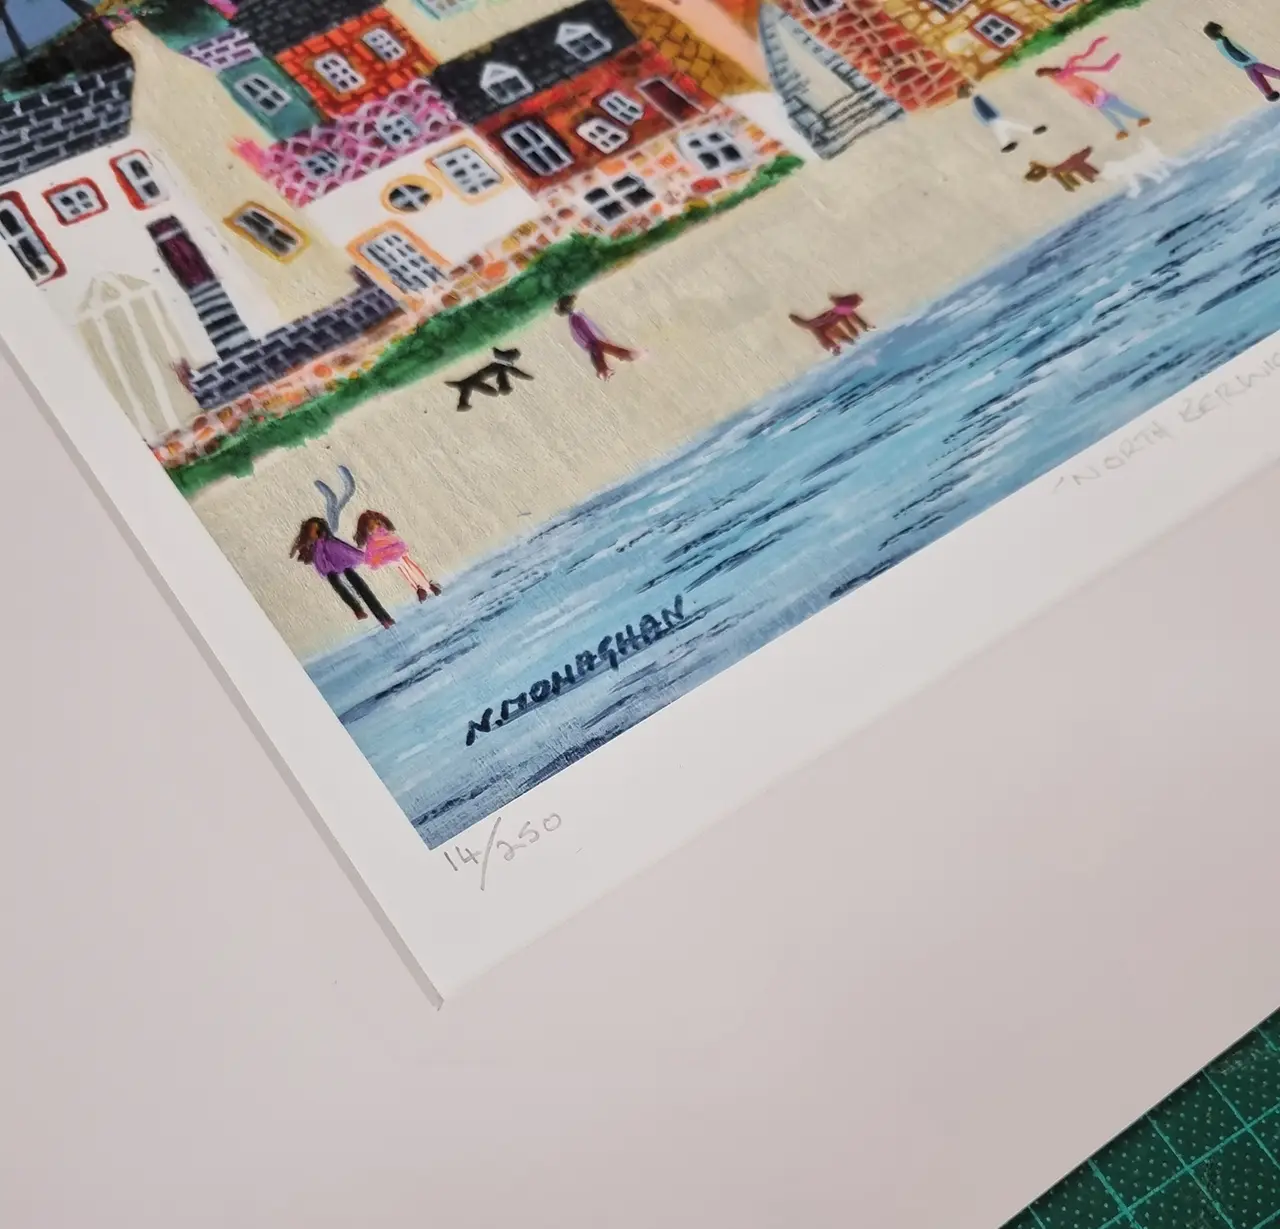 Nikki Monaghan Giclee Print of North Berwick Law showing the number for this print